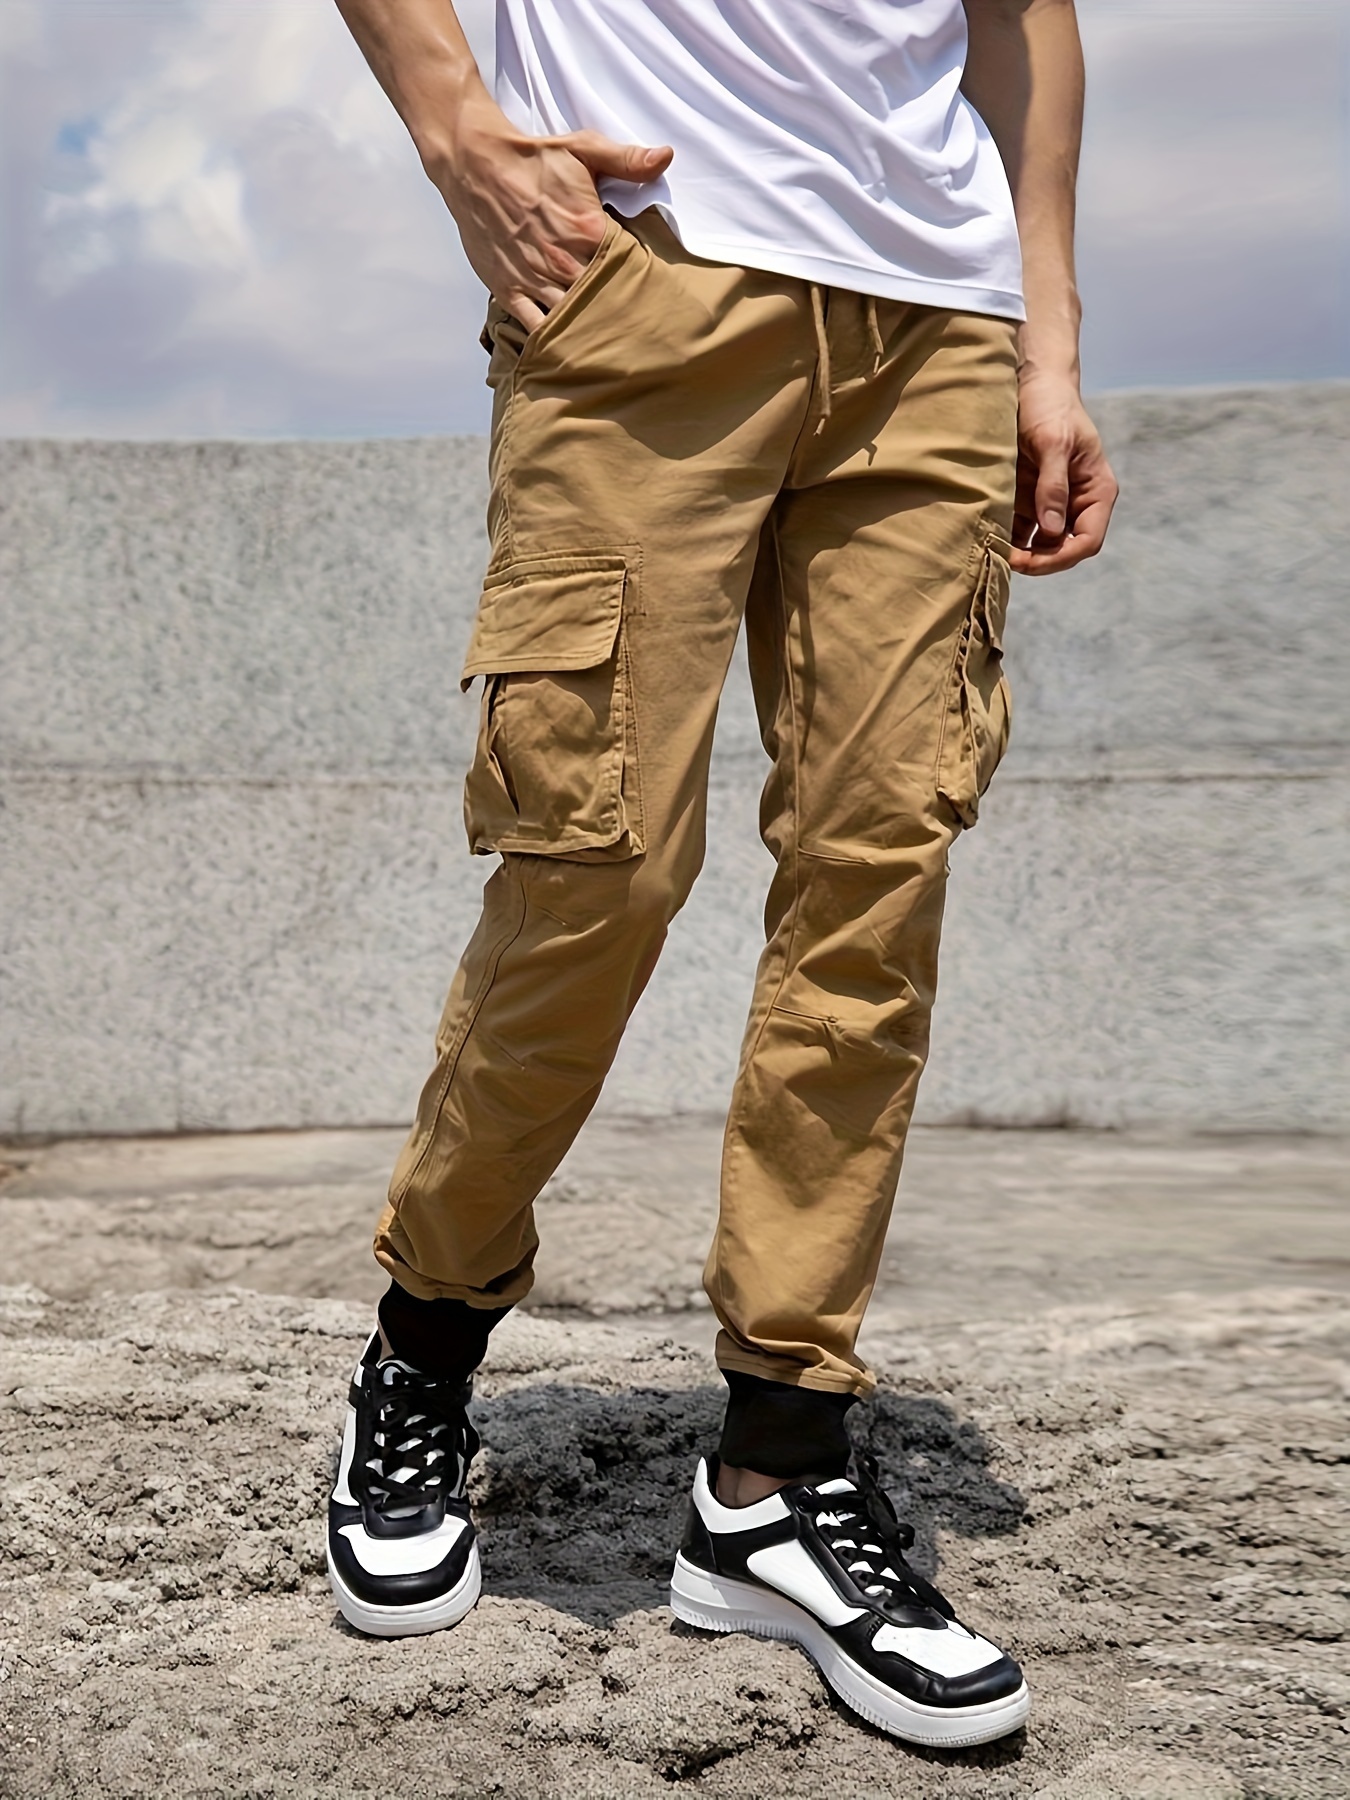 Men Loose Baggy Cargo Pants Trousers Hip Hop Pockets Casual Sports